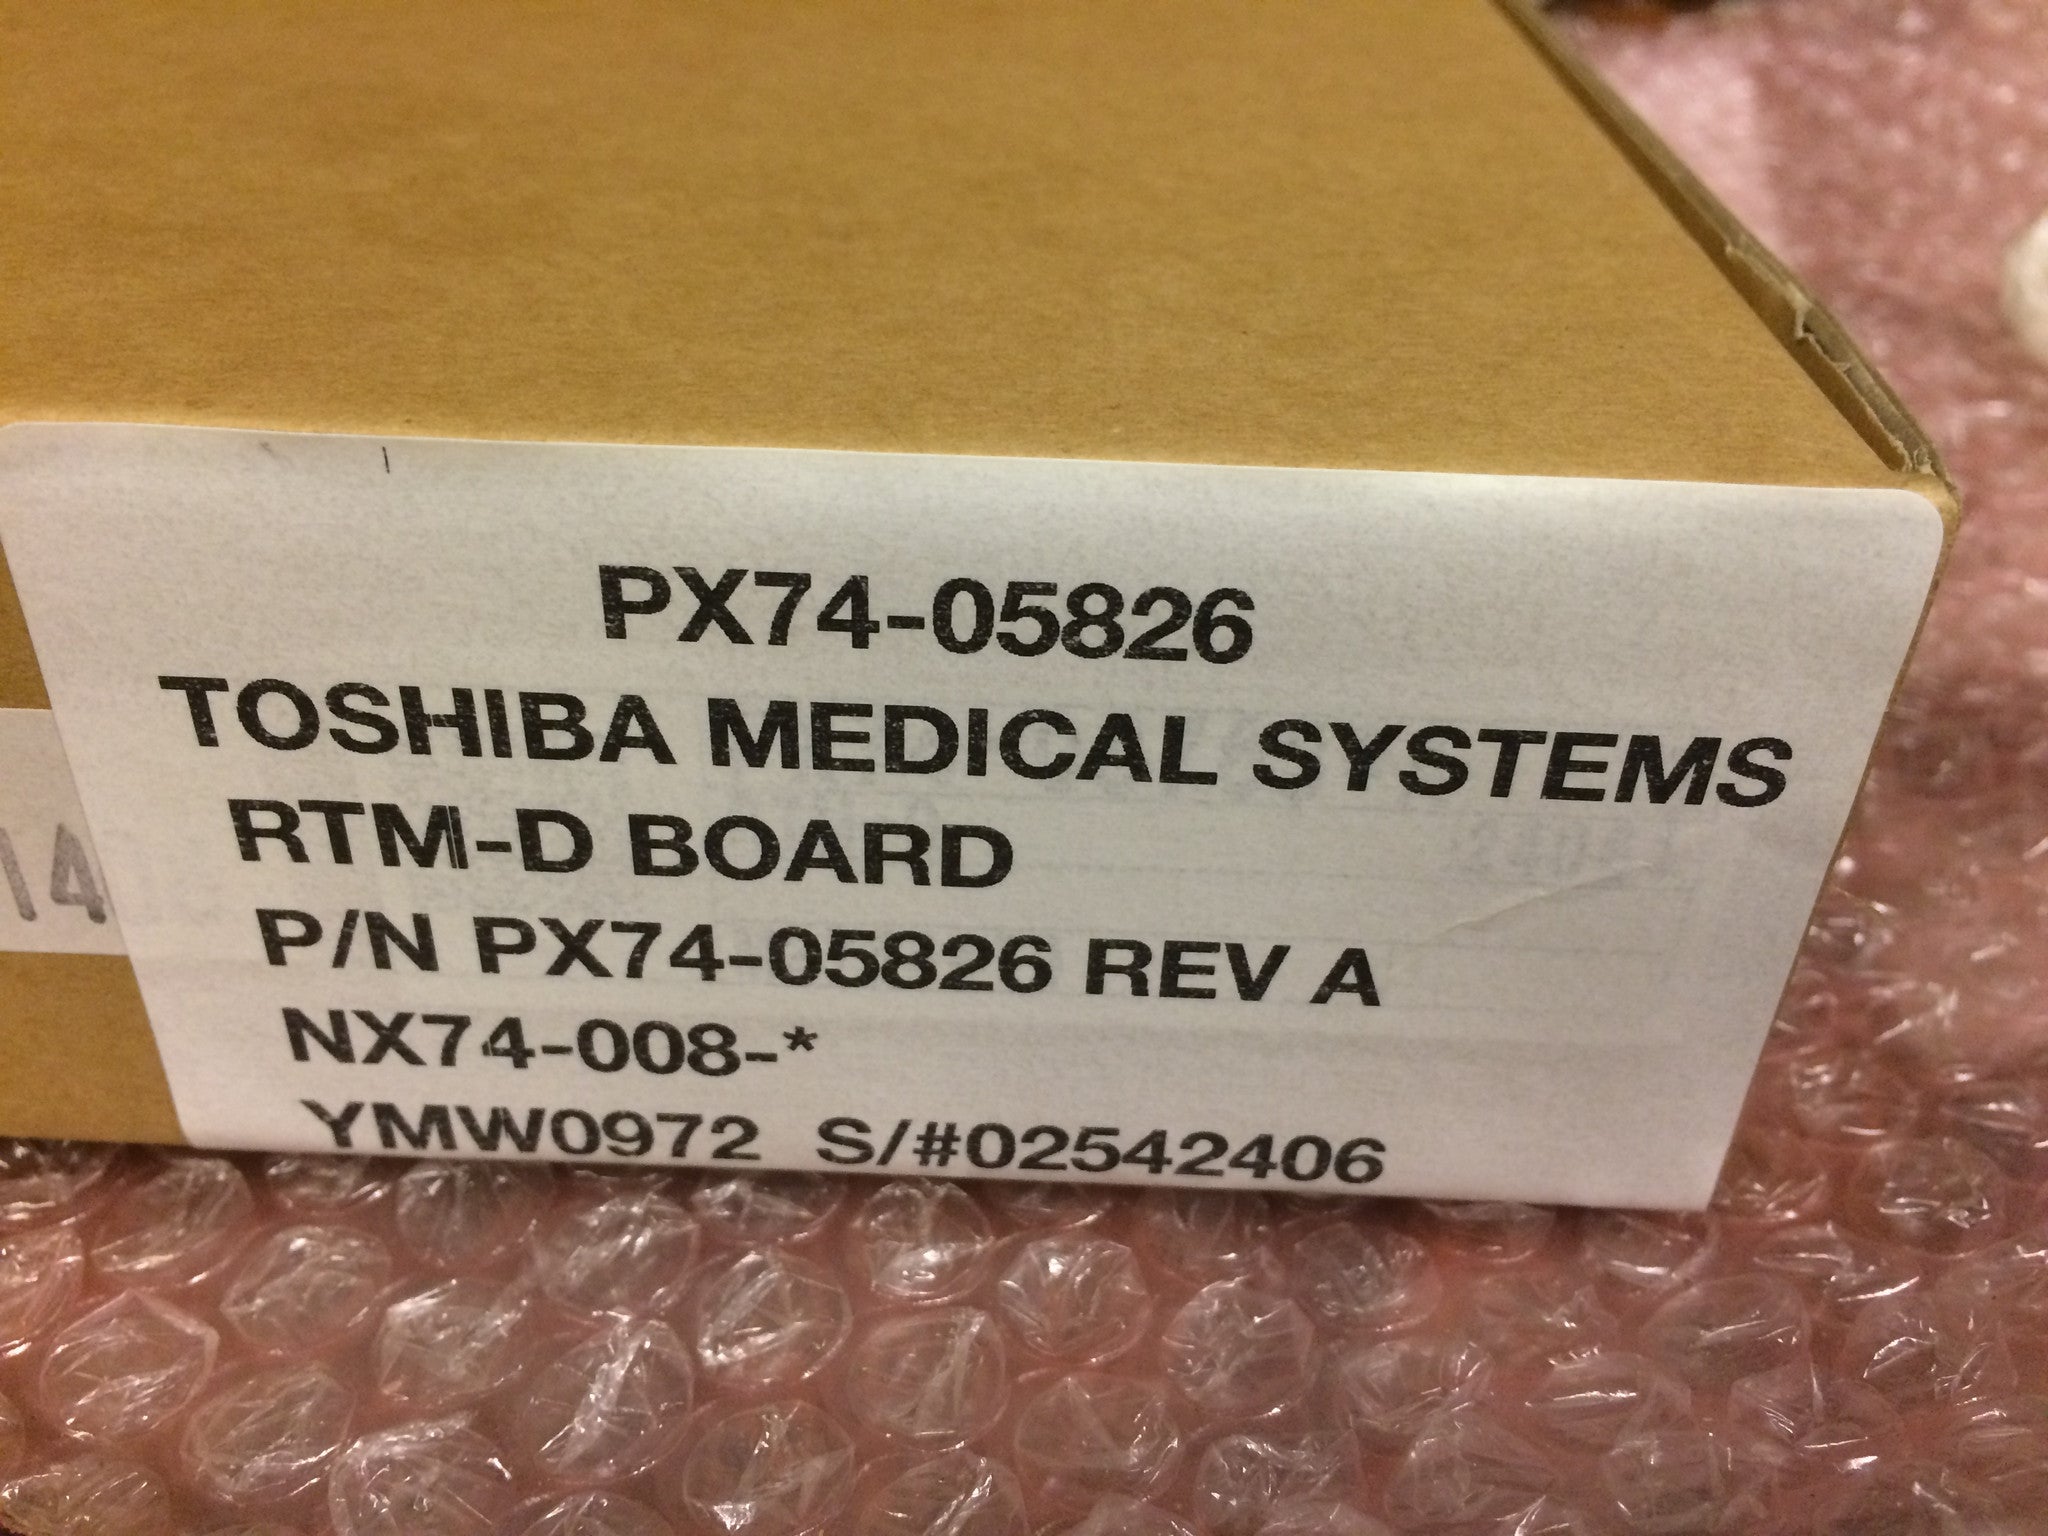 PX74-05826 RTM-D for Toshiba Aquilion CT Scanner - Anatolia International, Parts - 4